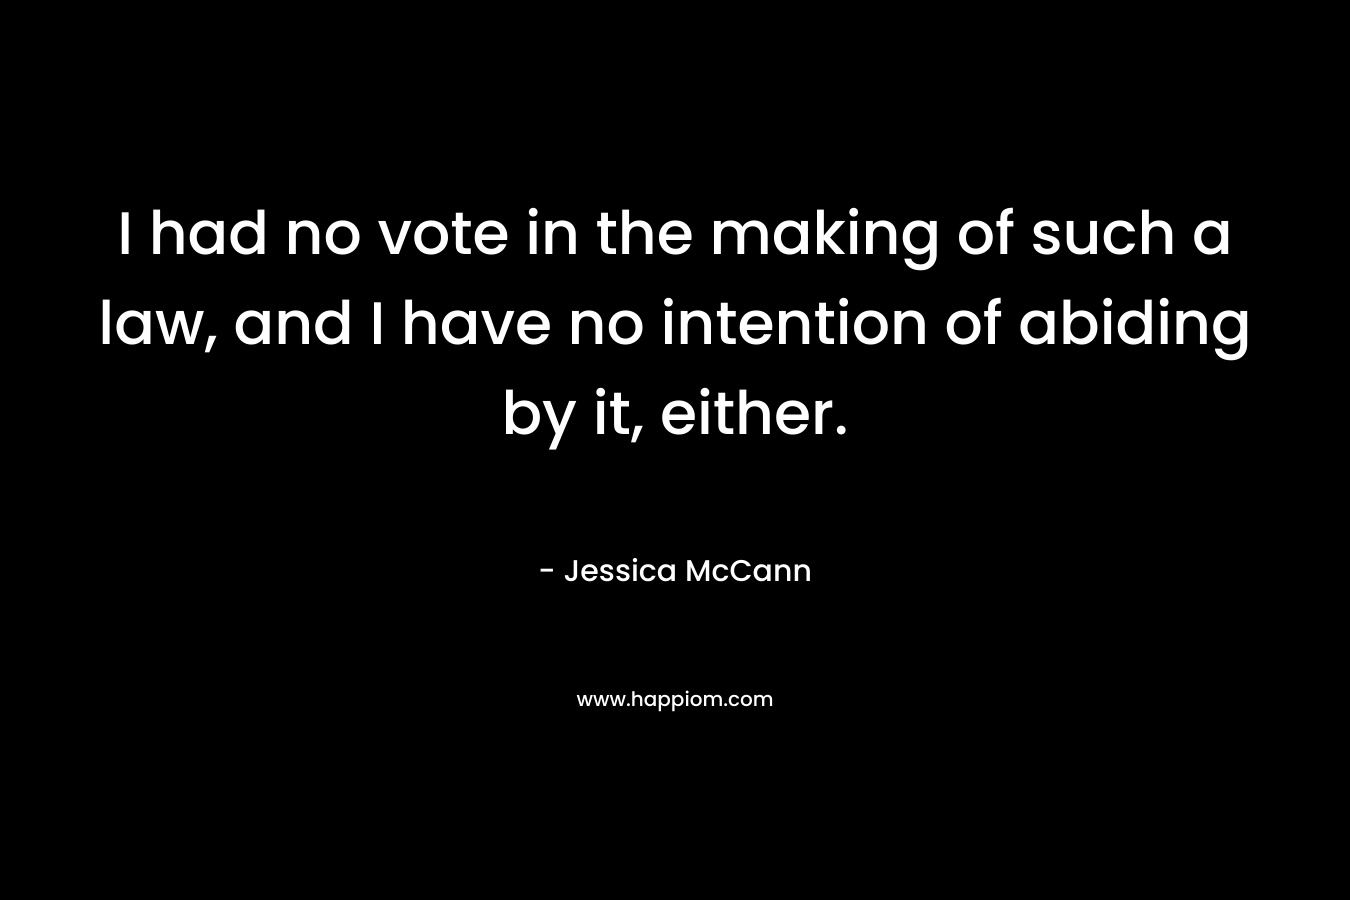 I had no vote in the making of such a law, and I have no intention of abiding by it, either. – Jessica McCann